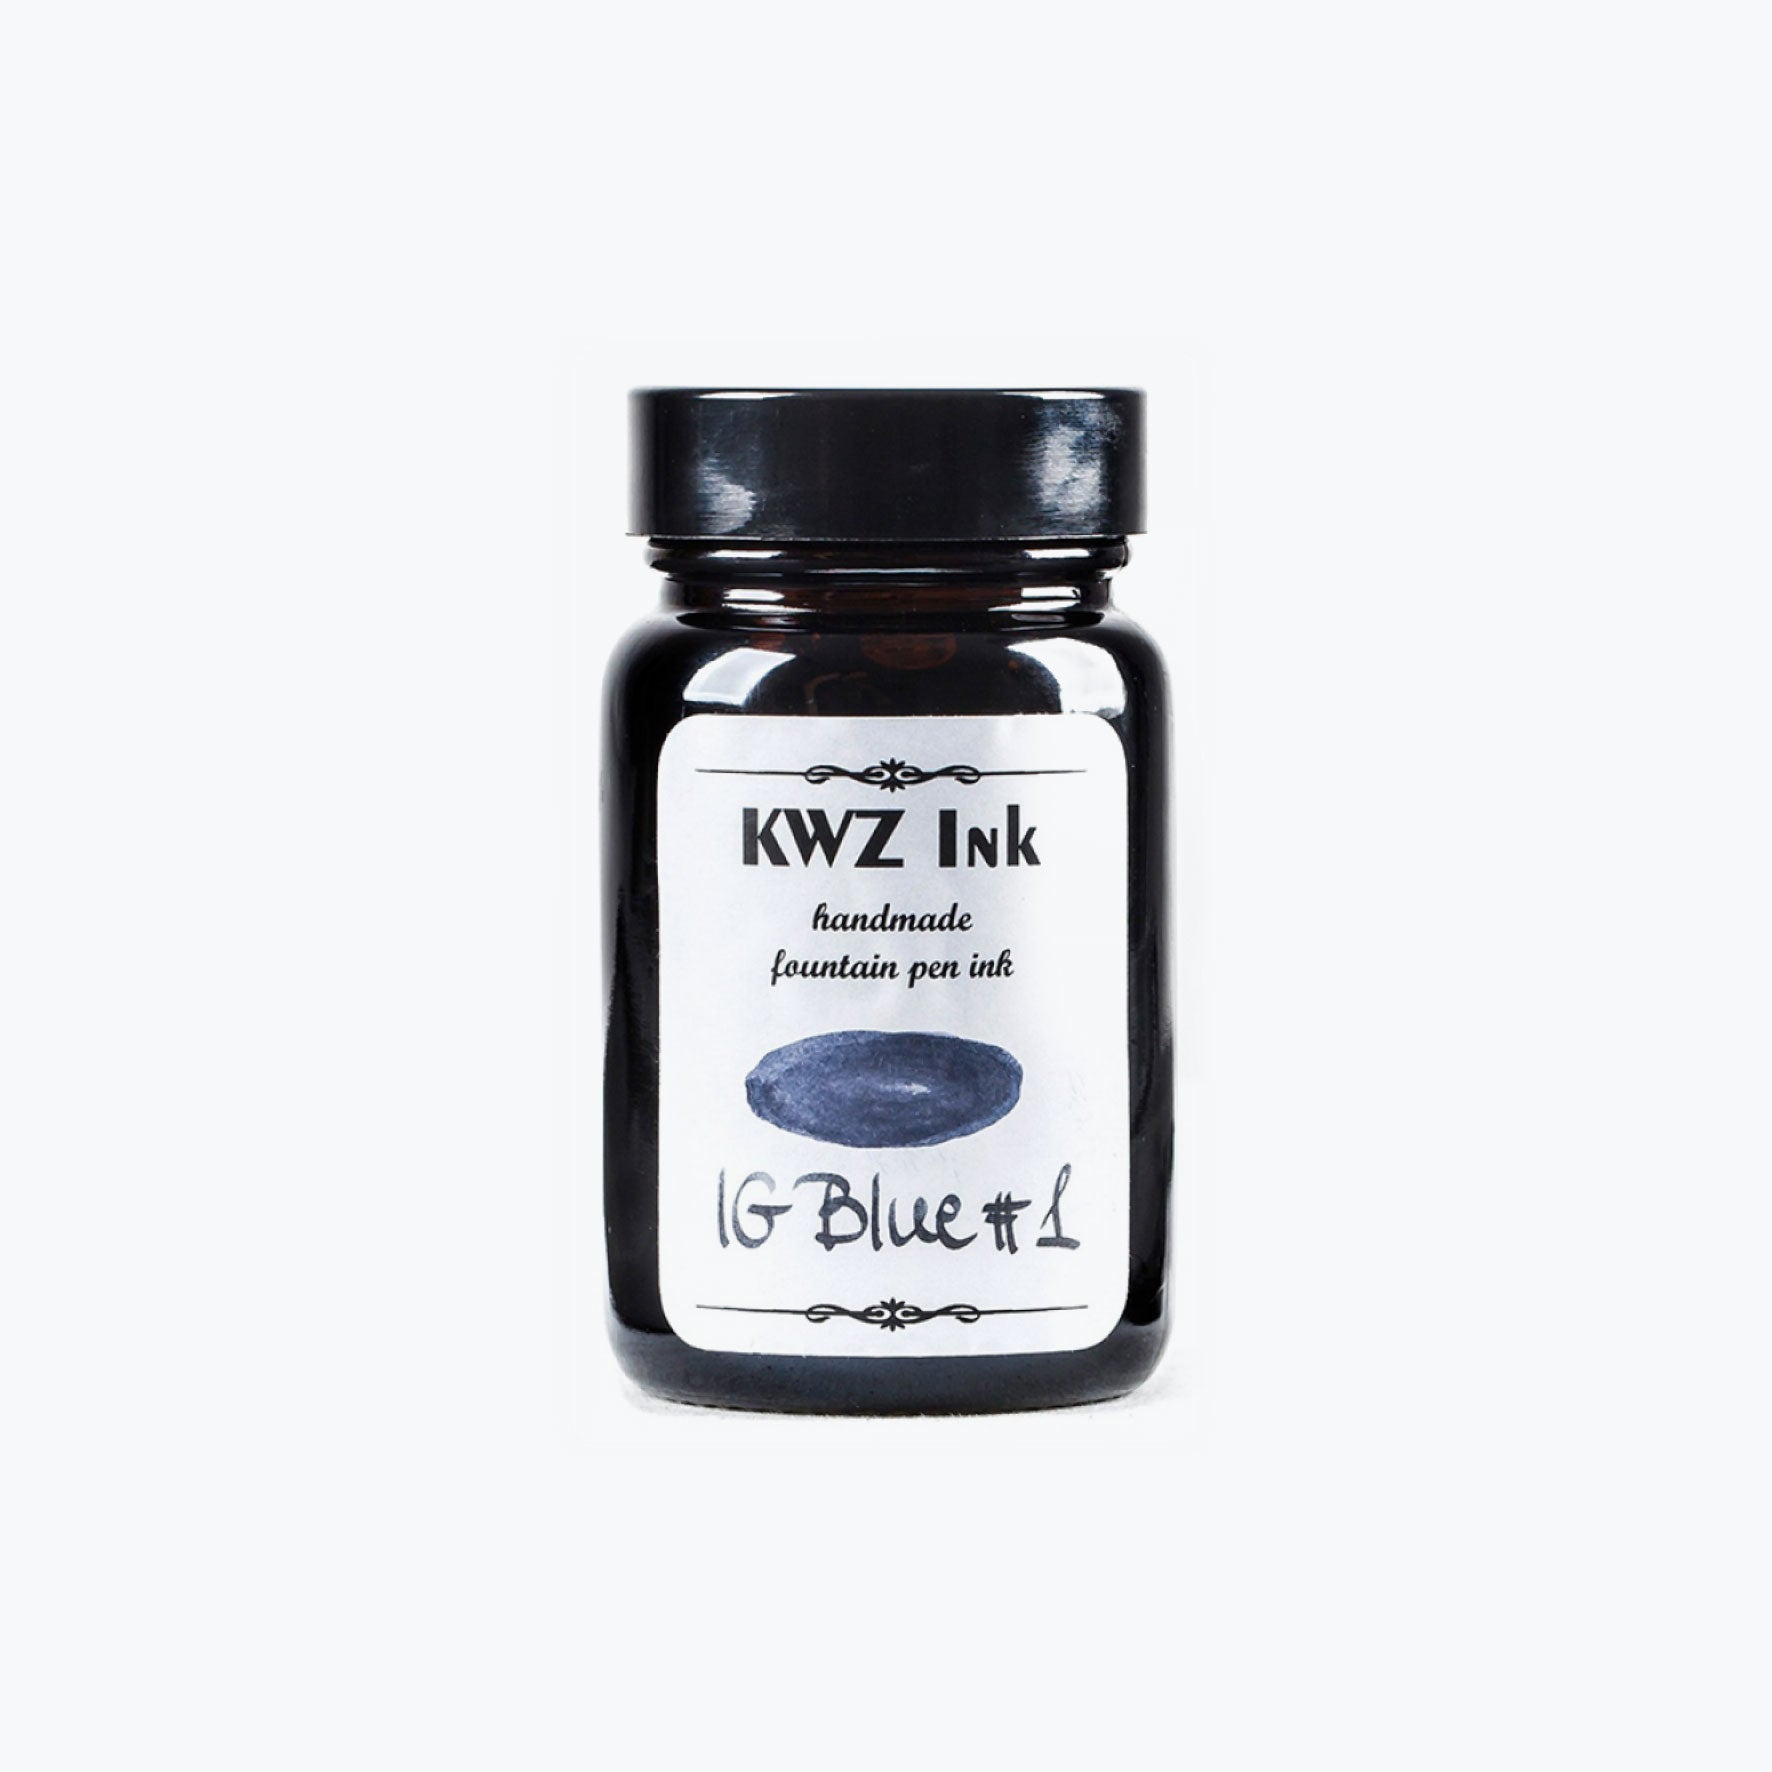 KWZ - Fountain Pen Ink - Iron Gall - IG Blue #1